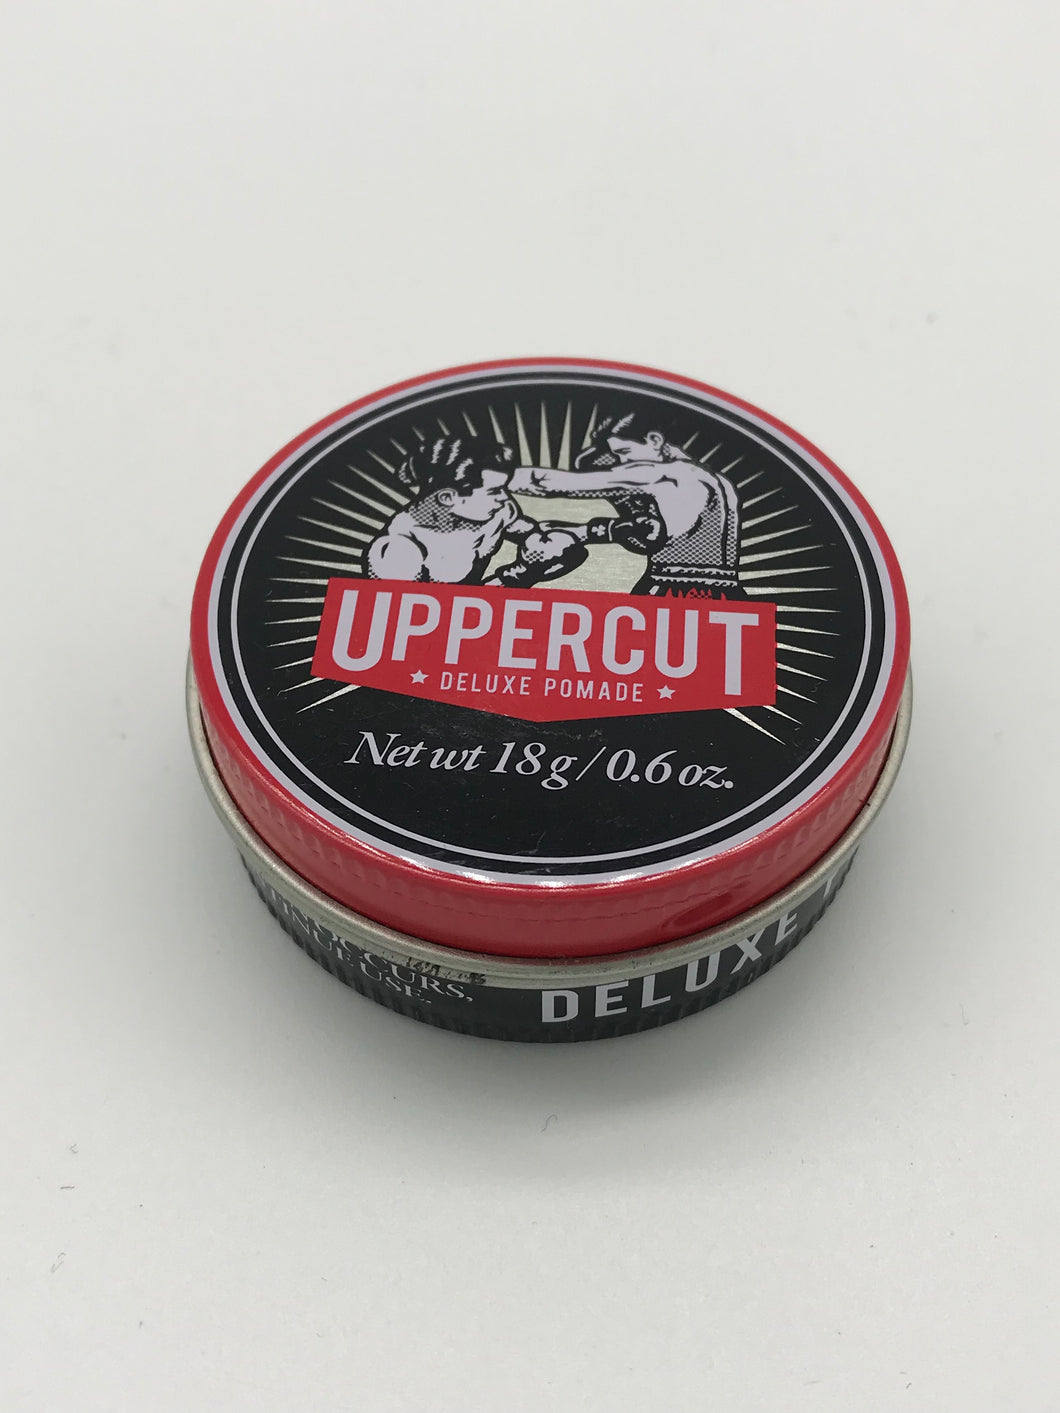 Uppercut Deluxe Pomade Travel Size 0.6oz